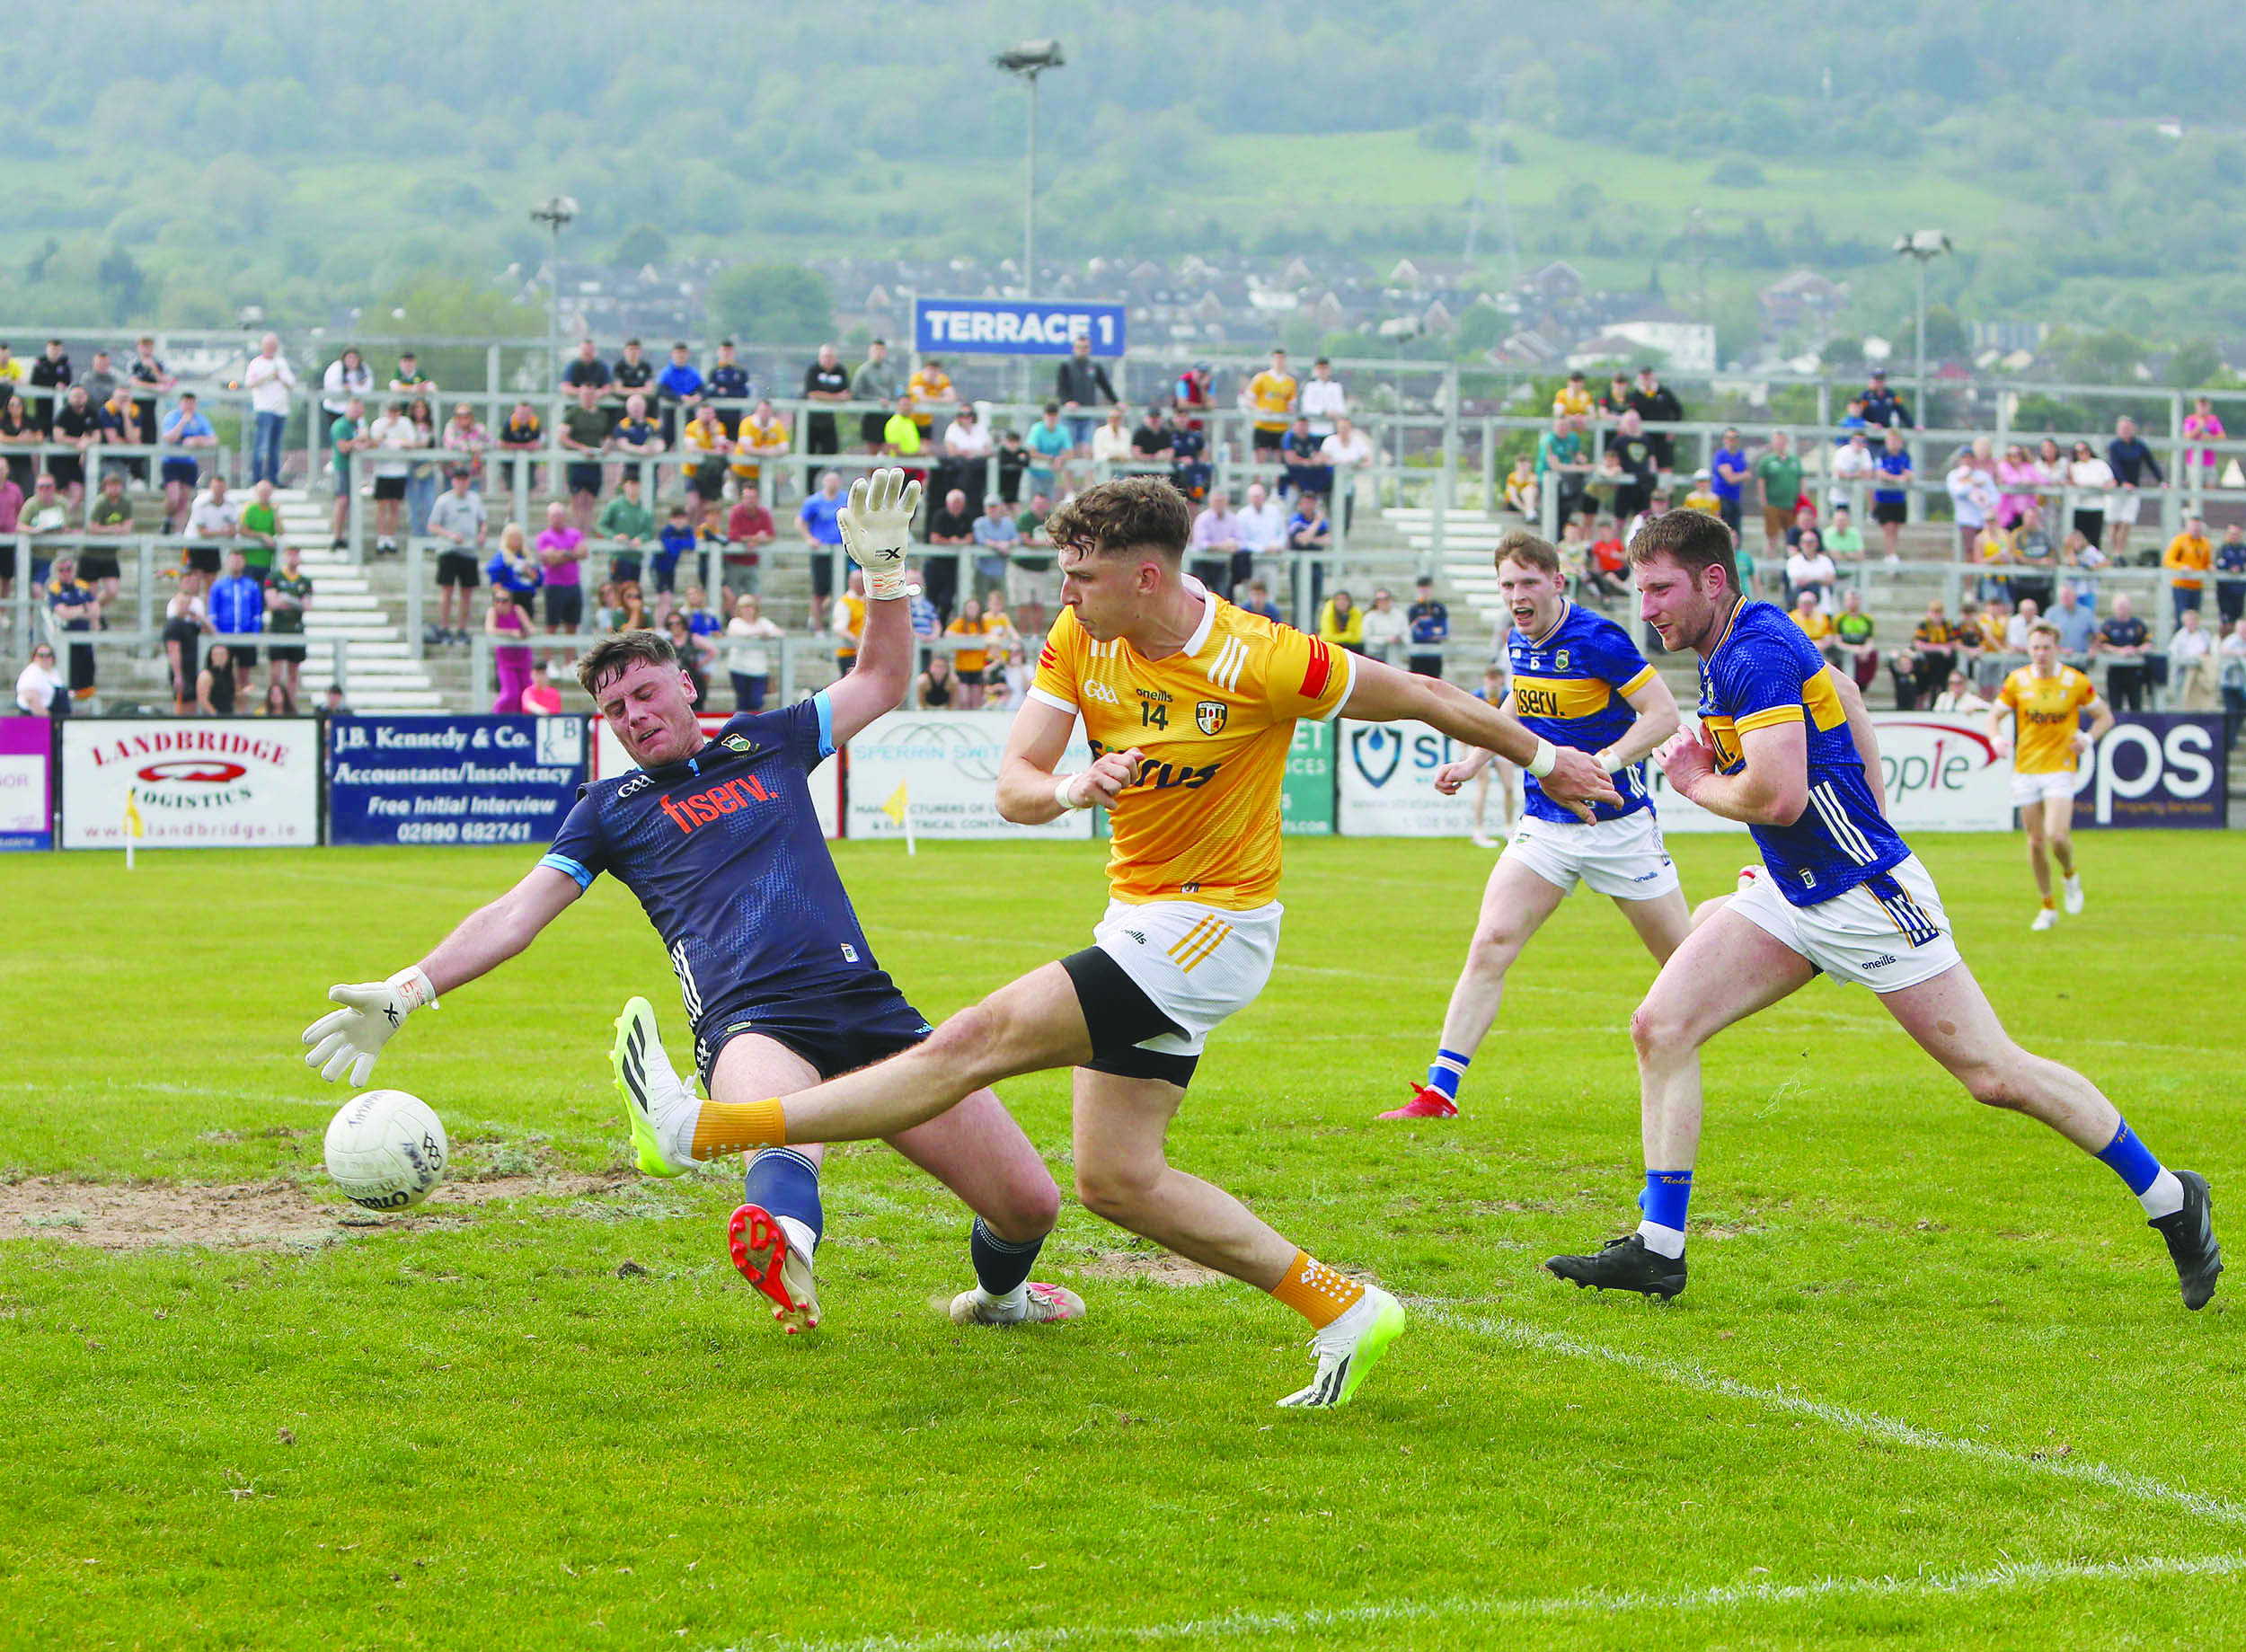 Ruairi McCann netted twice against Tipperary in Antrim’s opening Tailteann Cup game and the big Aghagallon man’s return from injury is a huge boost for the Saffrons